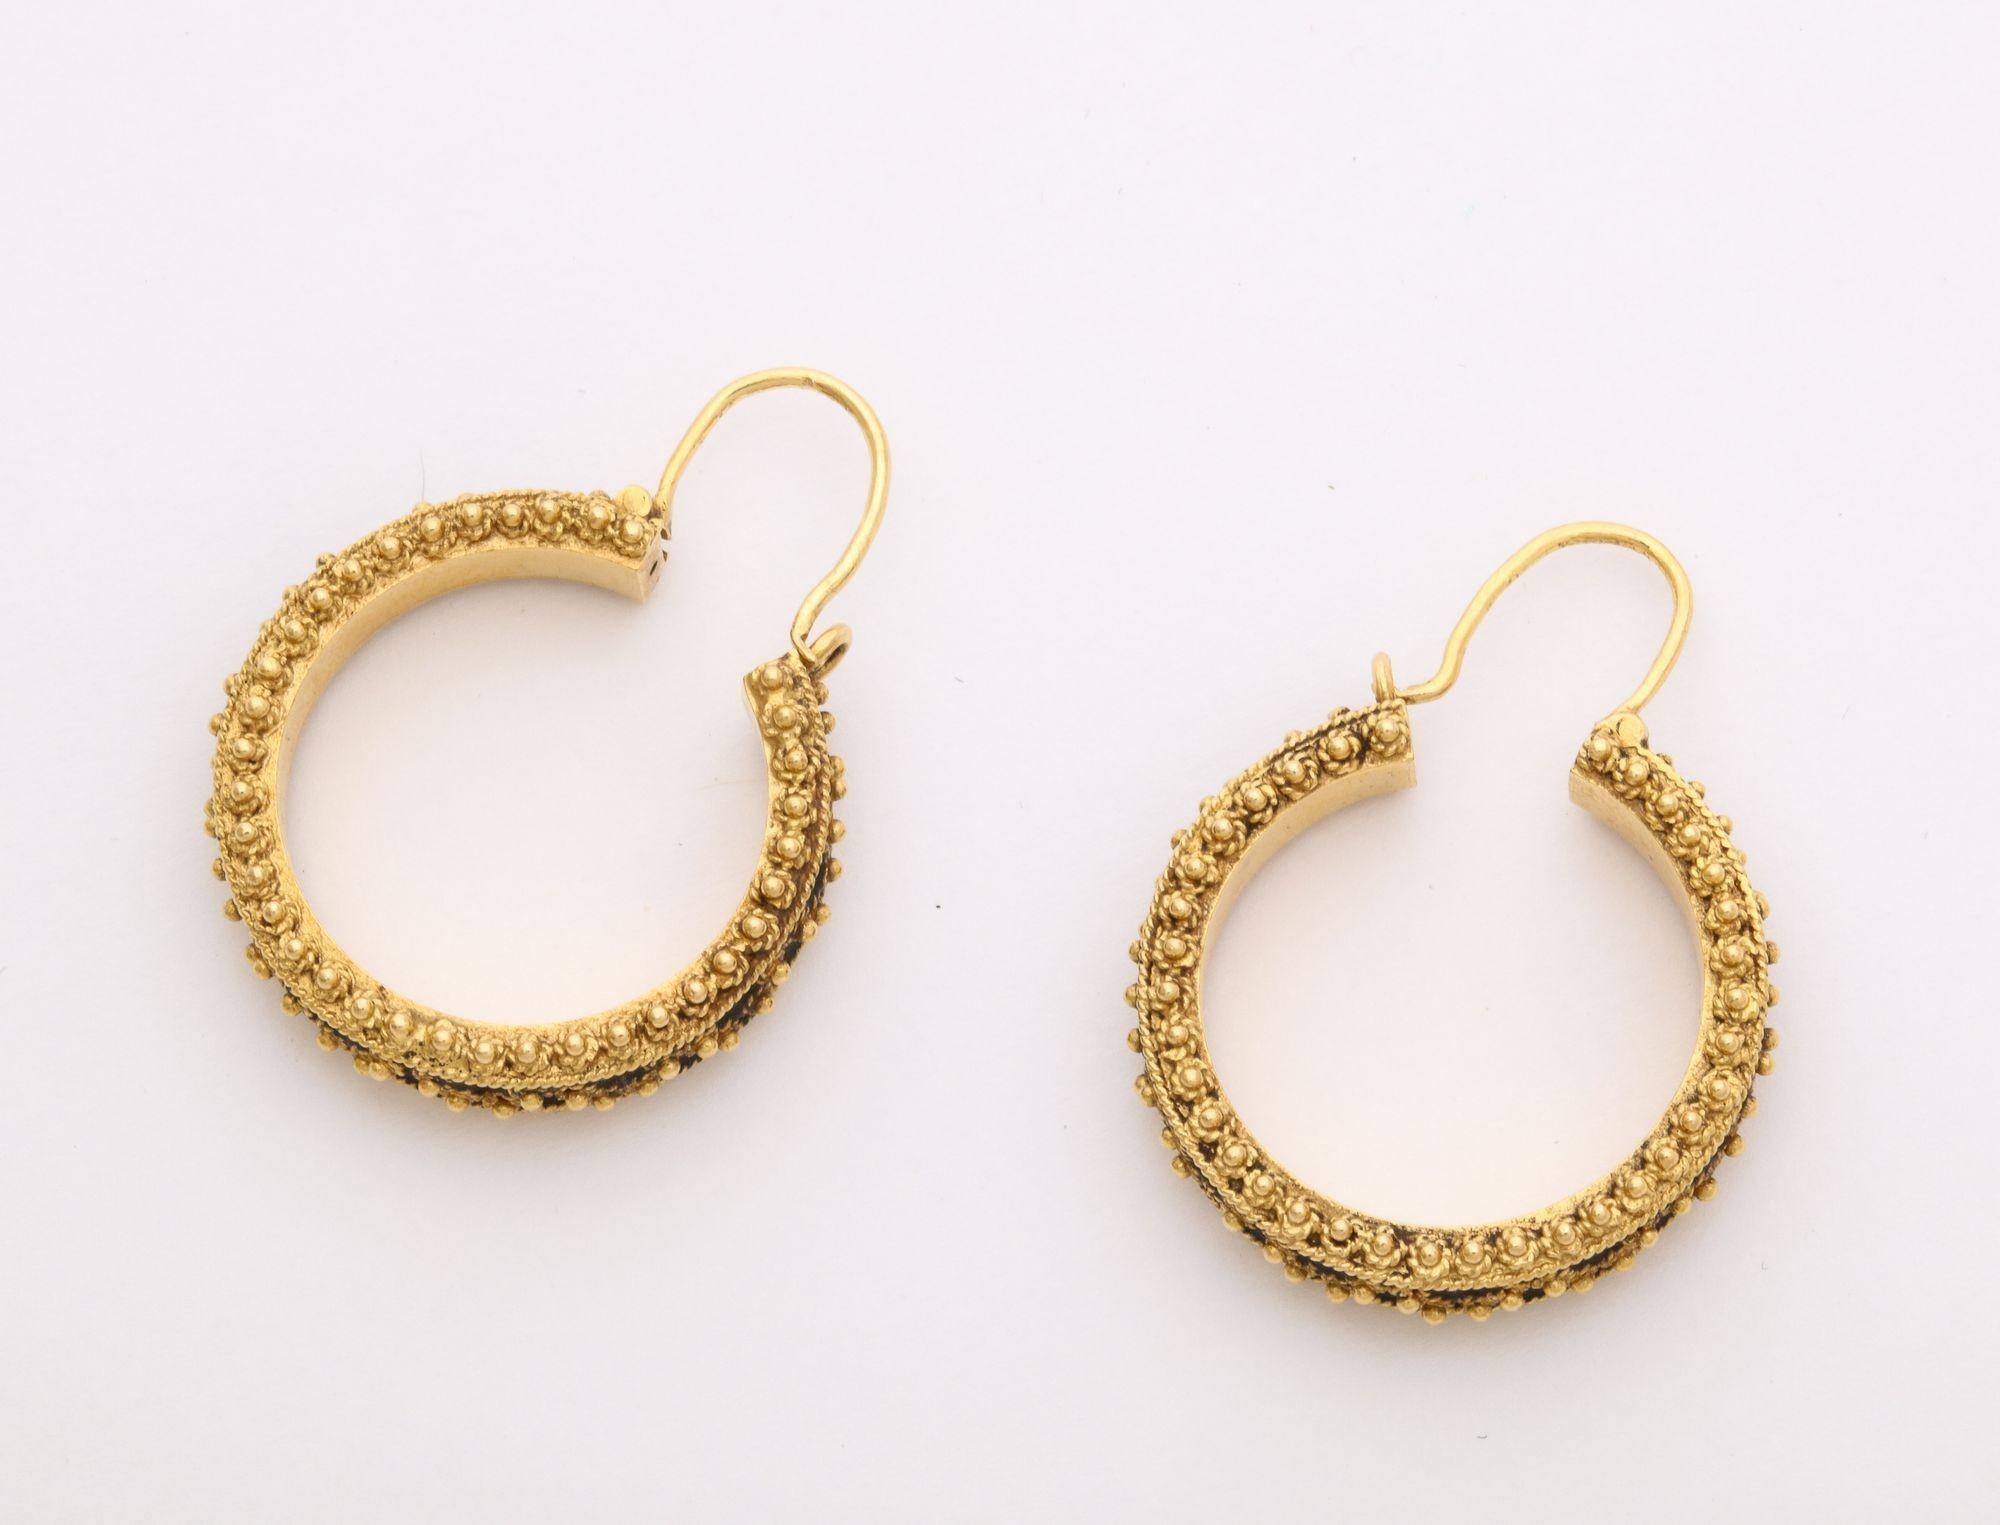 Women's 18 k Gold Articulated  Hoop Earrings With Bead Work For Sale